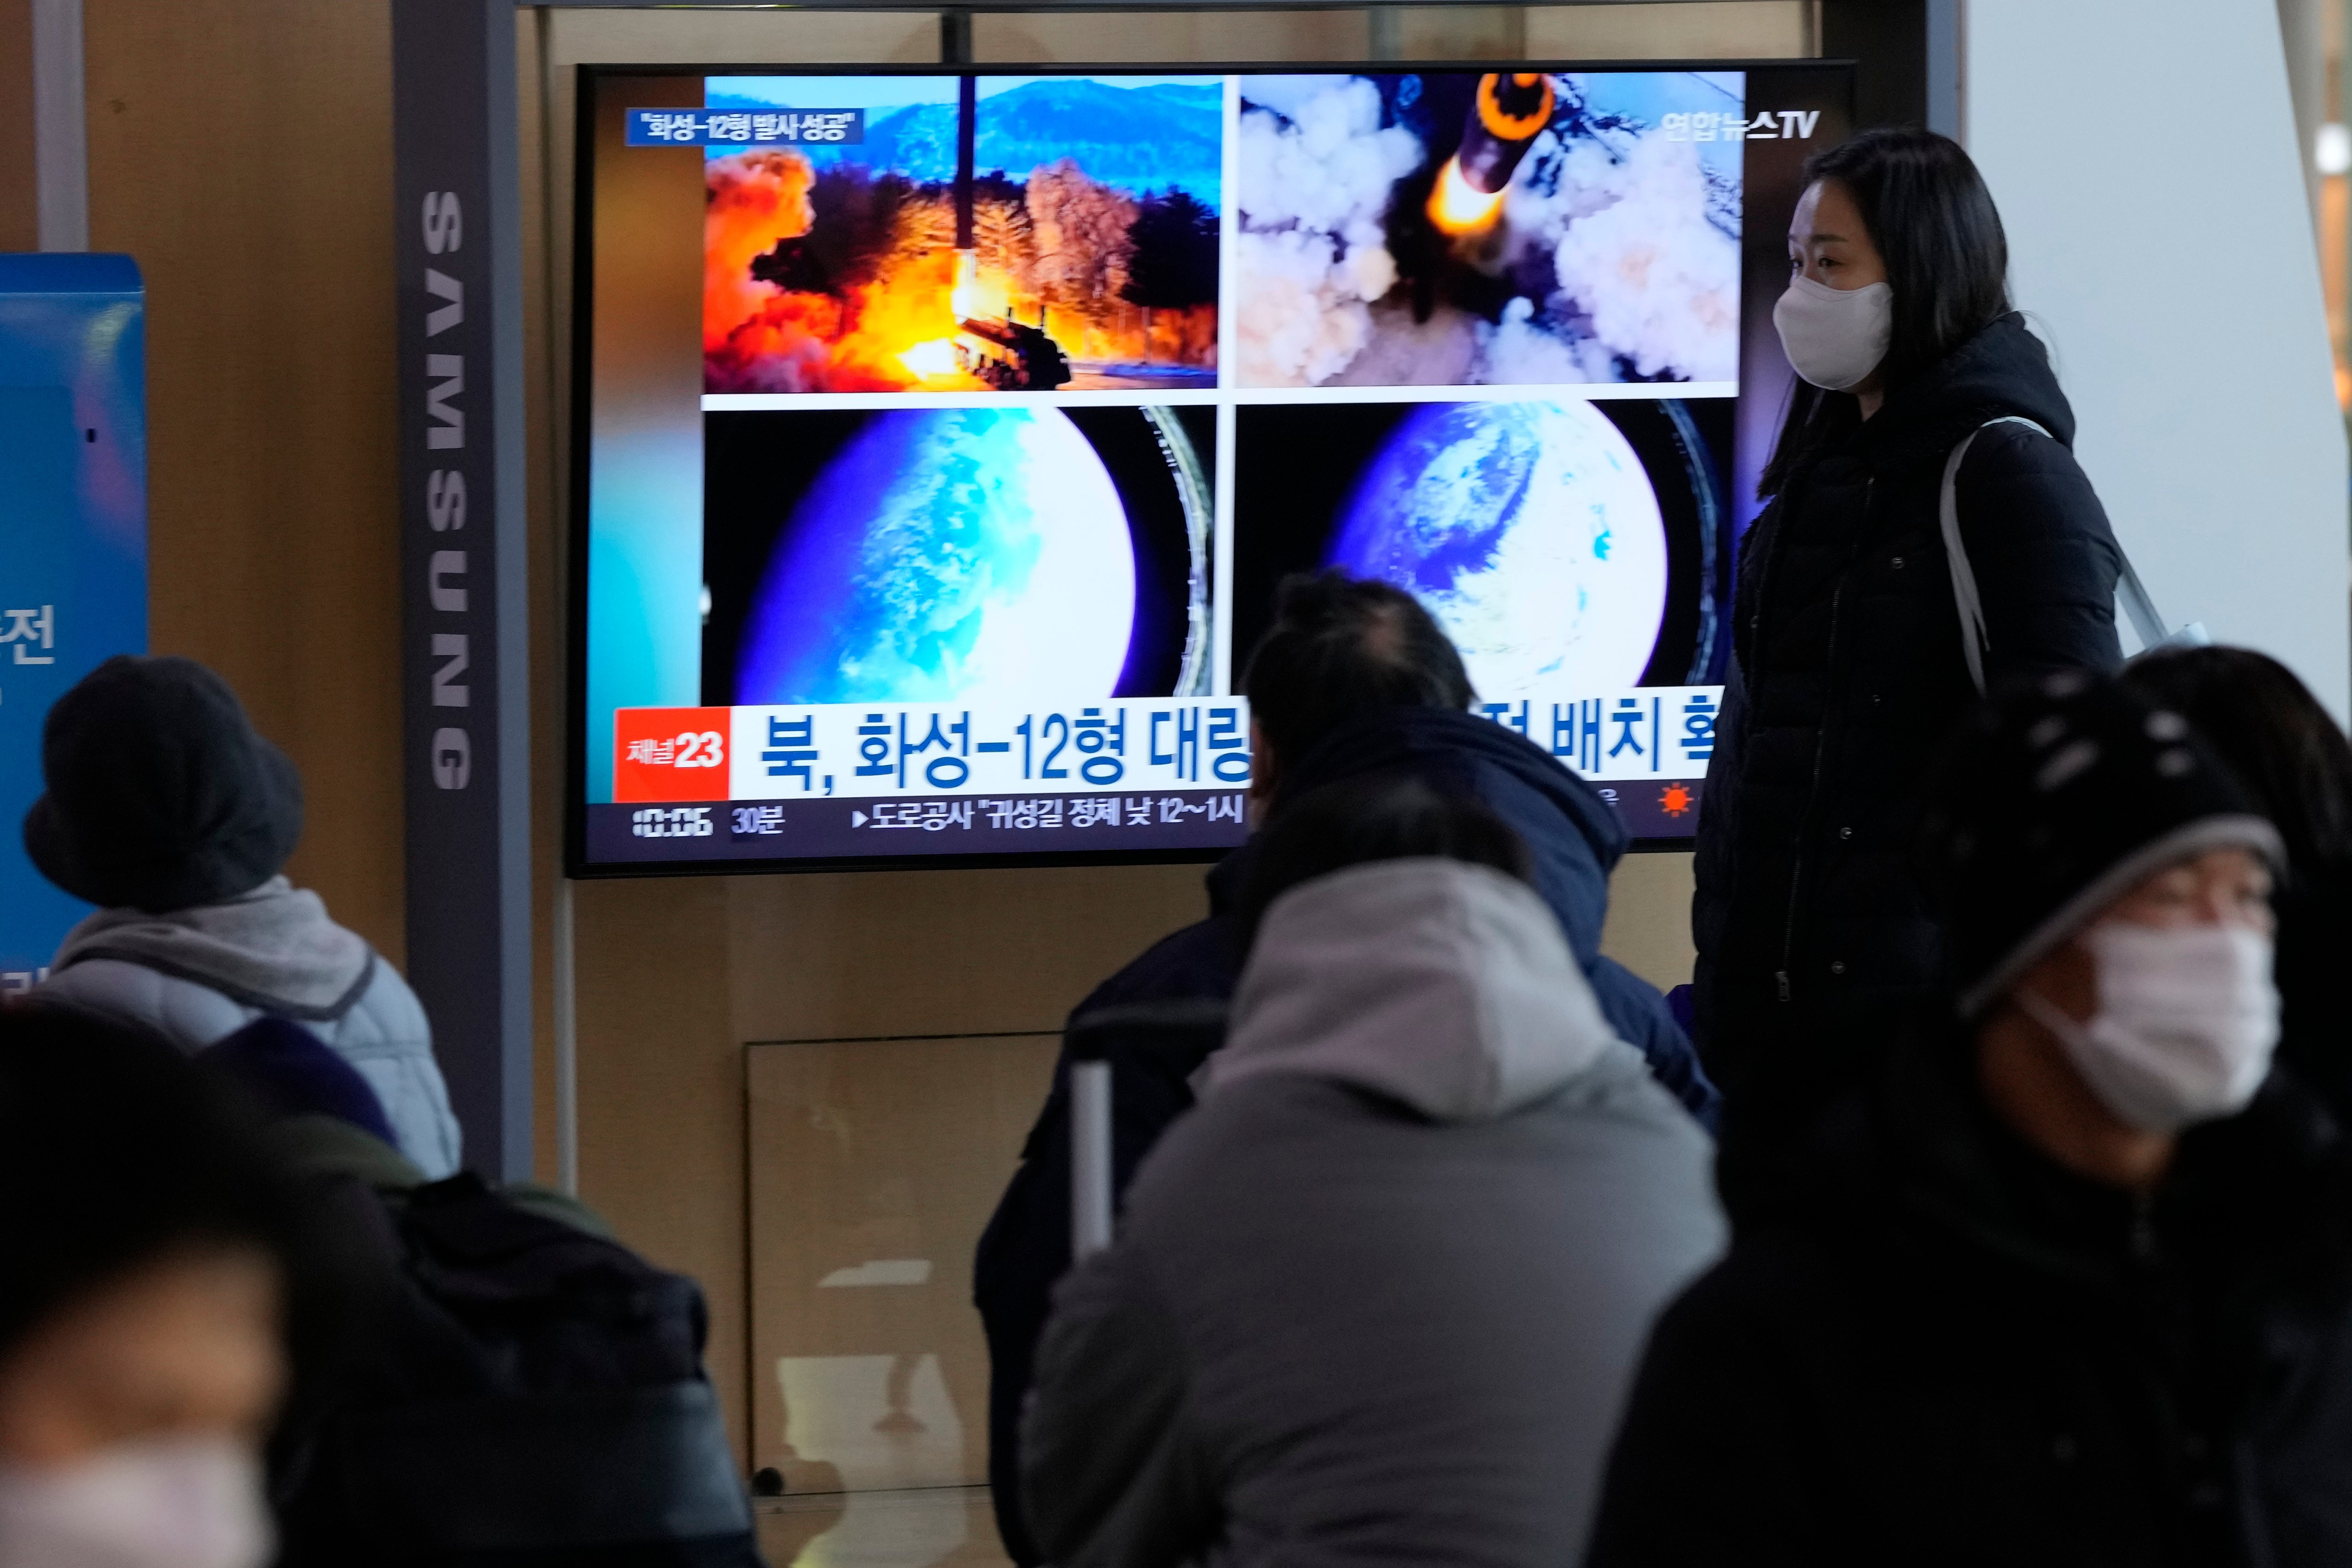 People watch a TV showing images of North Korea's missile launch during a news program at the Seoul Railway Station